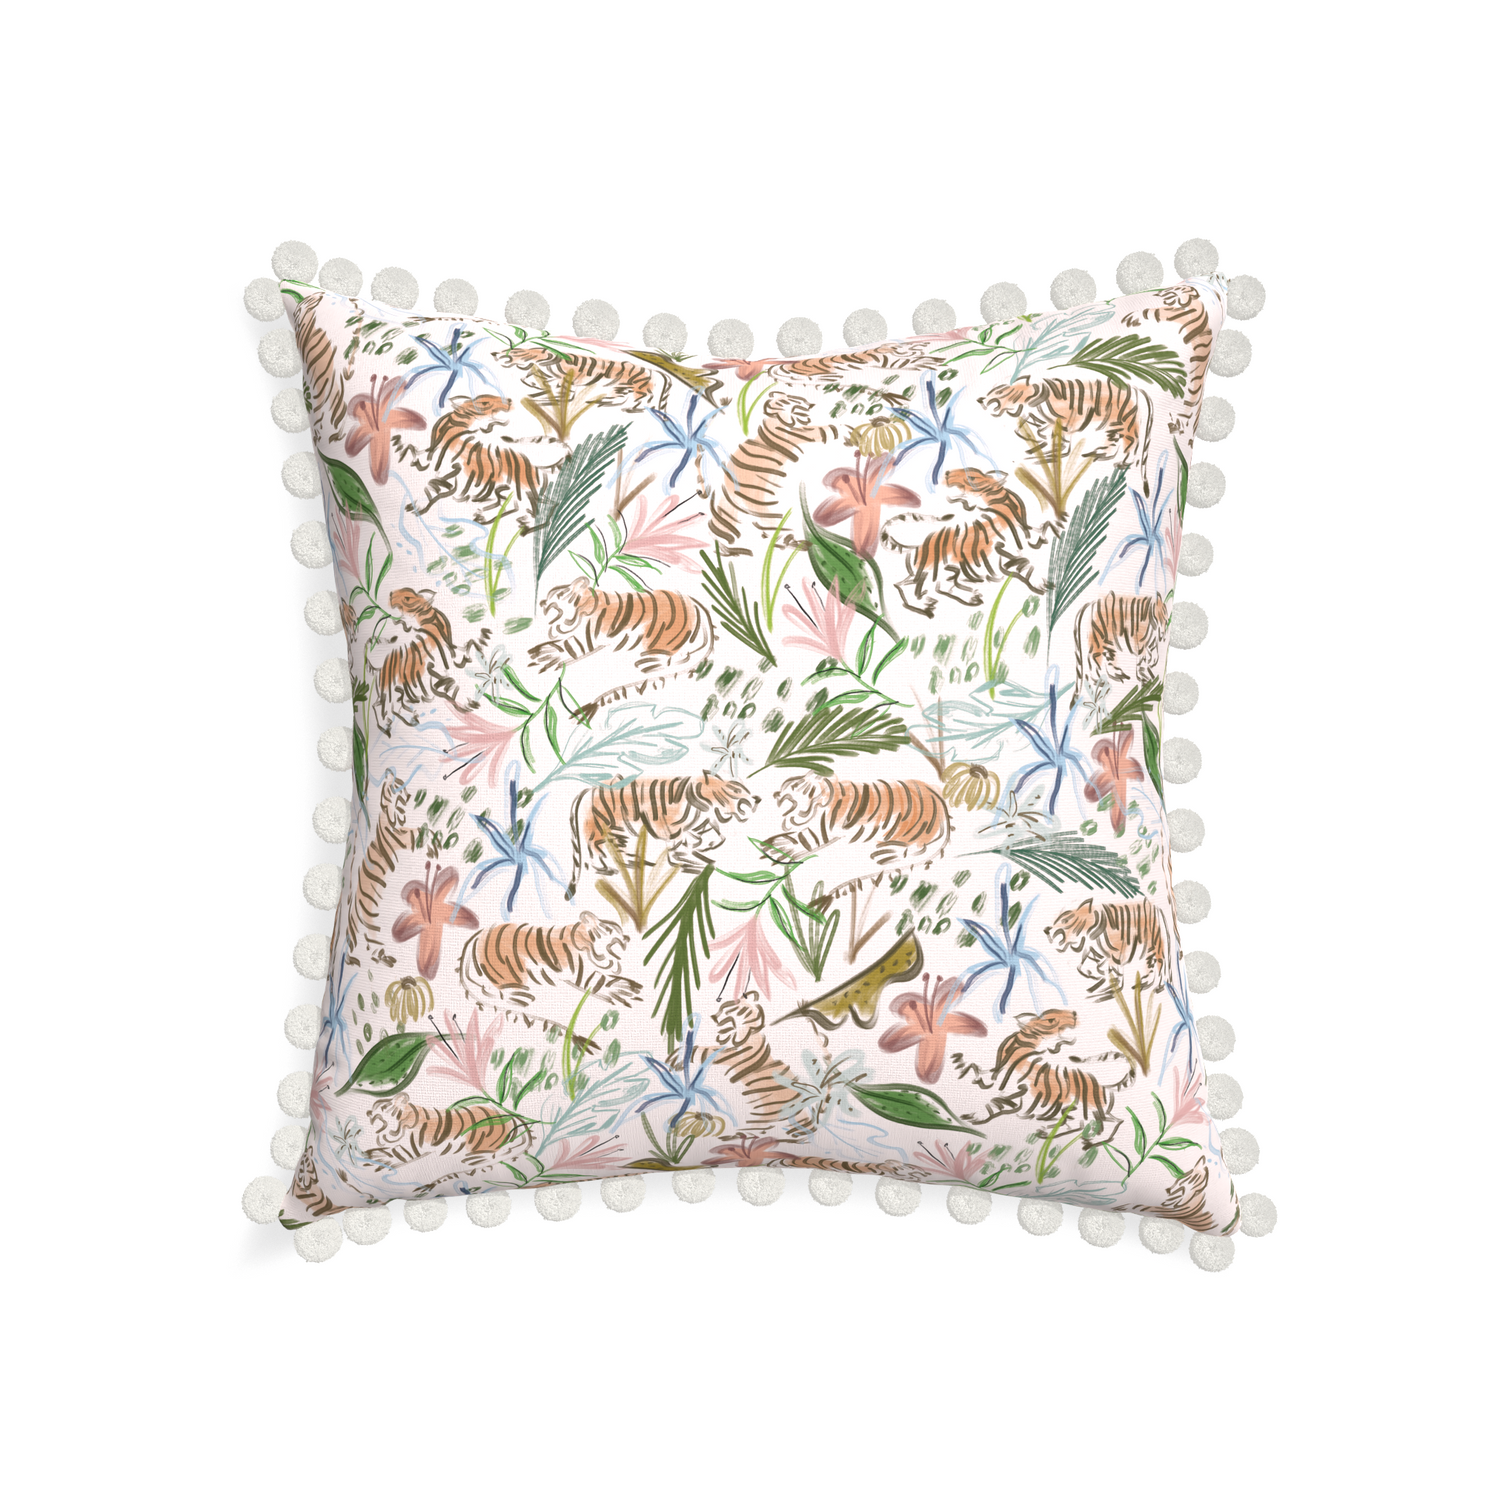 22-square frida pink custom pink chinoiserie tigerpillow with snow pom pom on white background